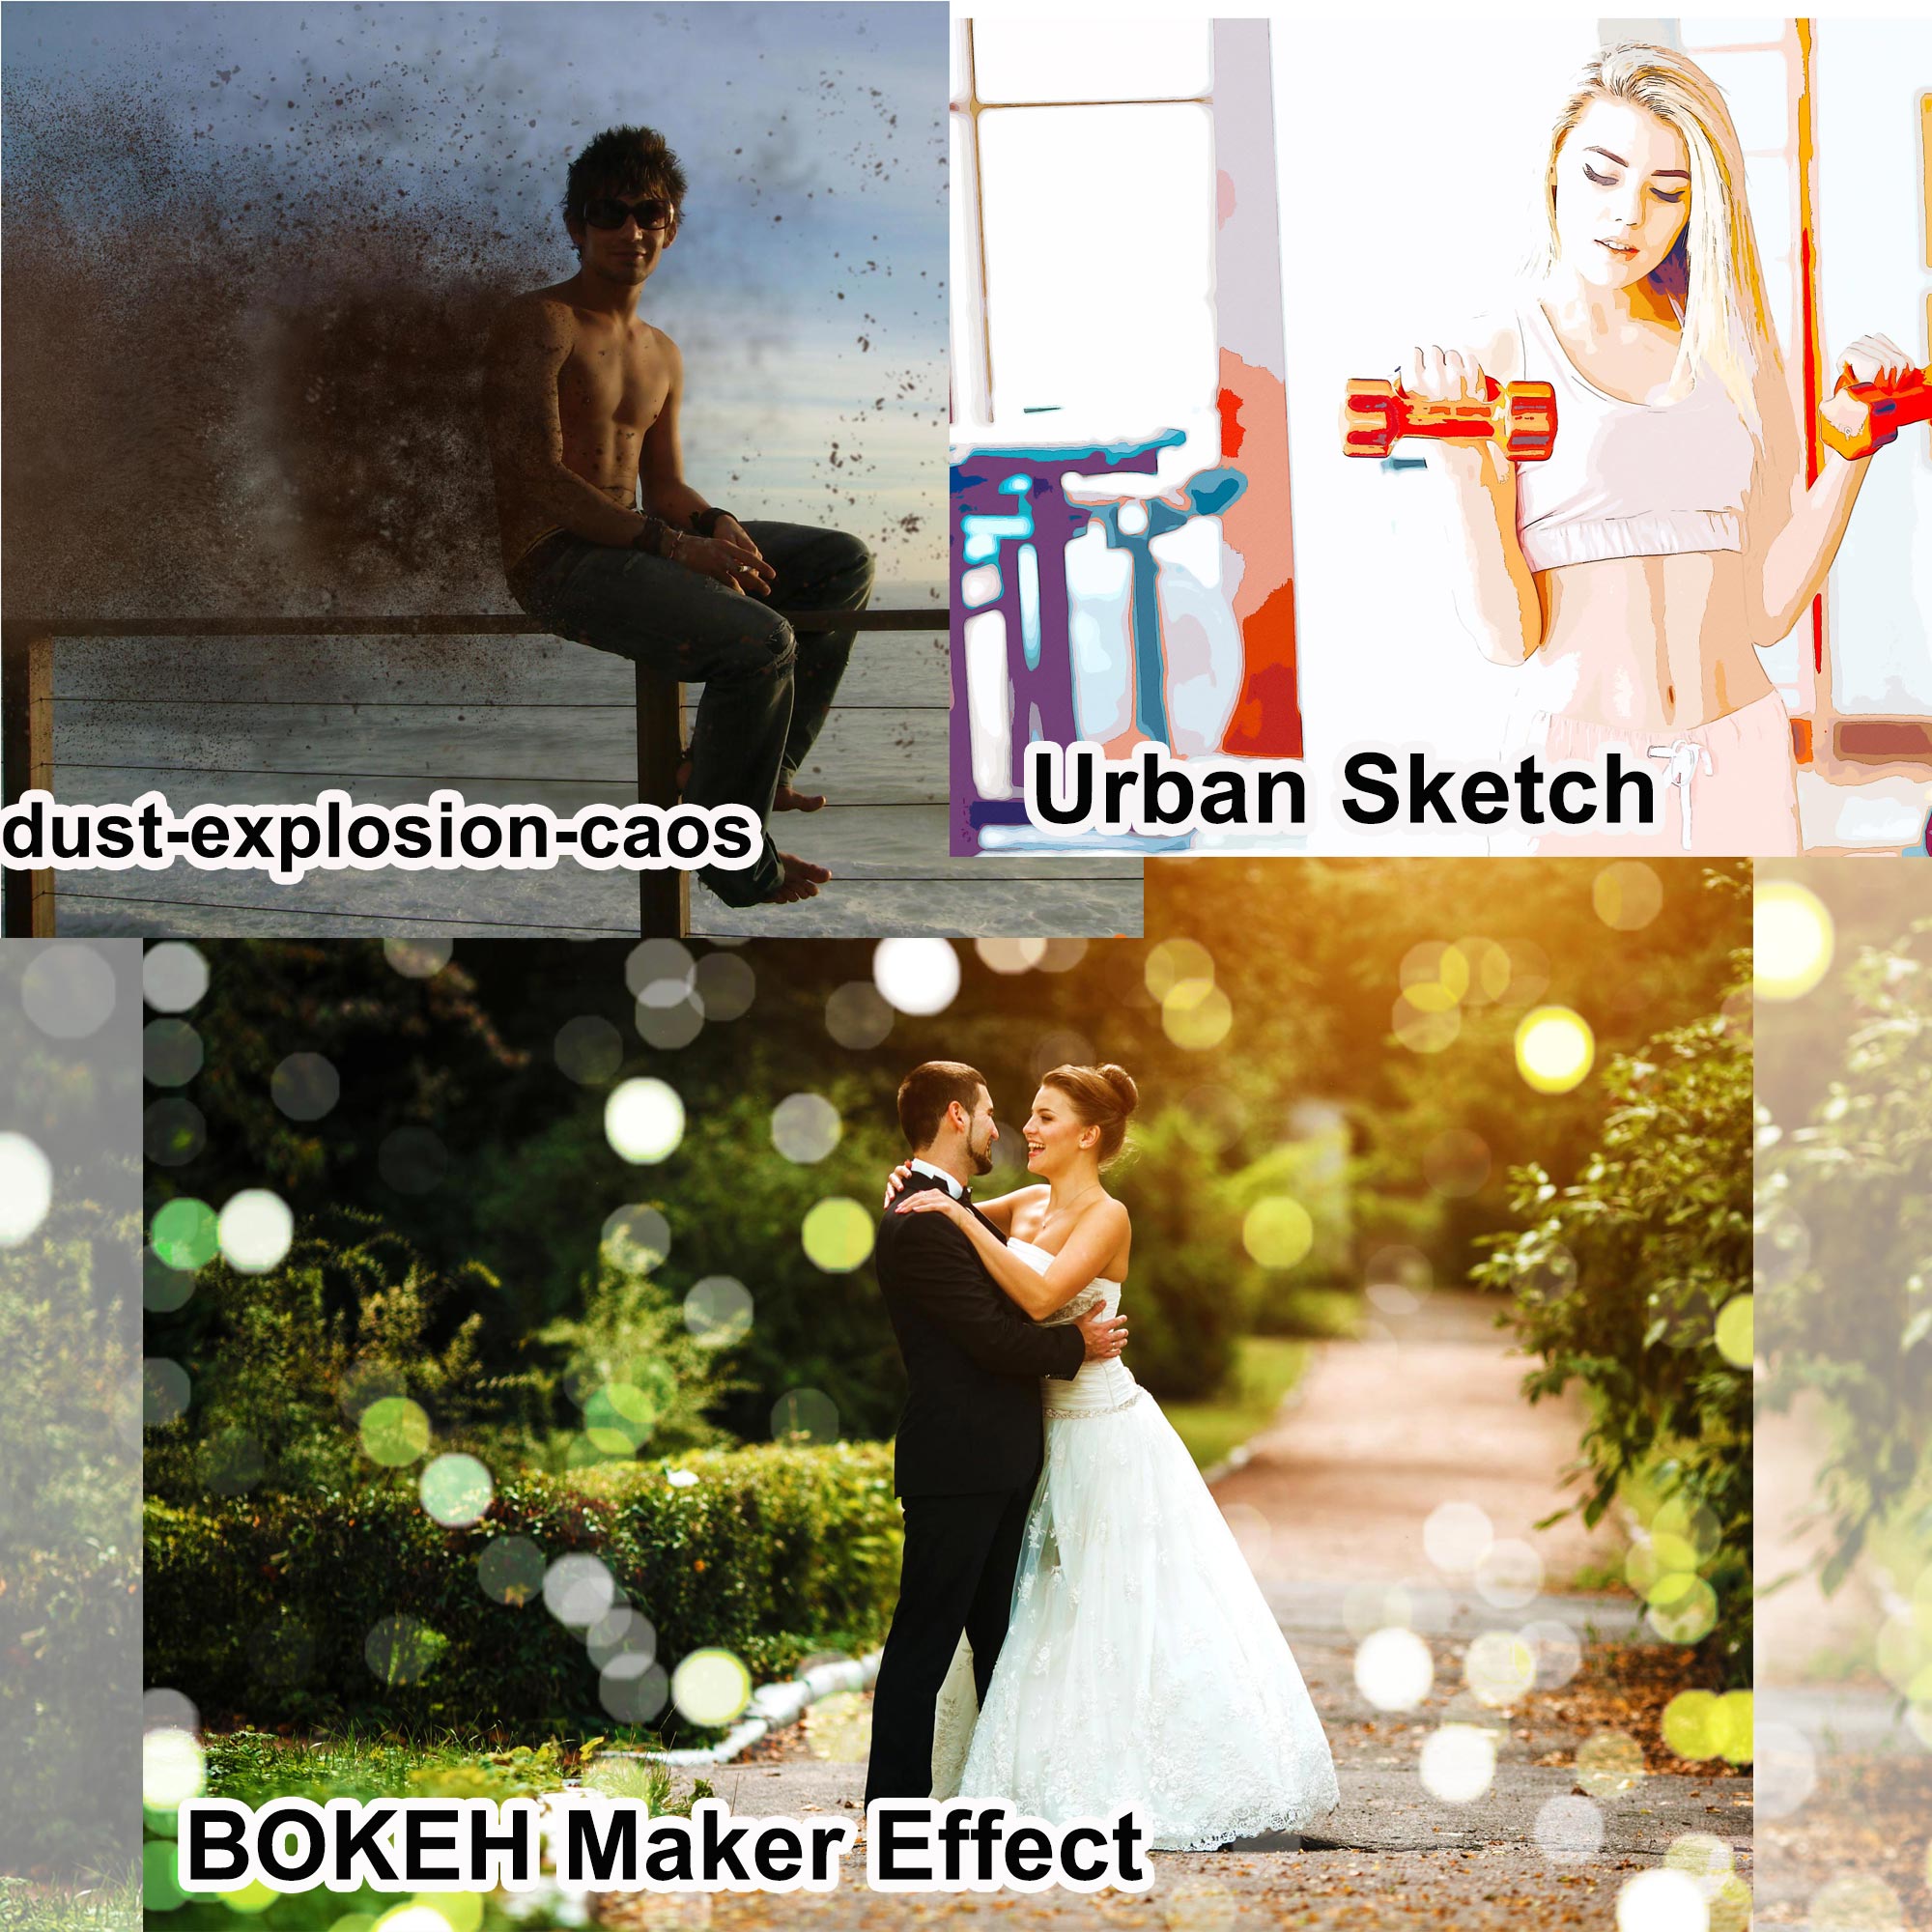 Creative Photo Editing in Photoshop in 24 Hour